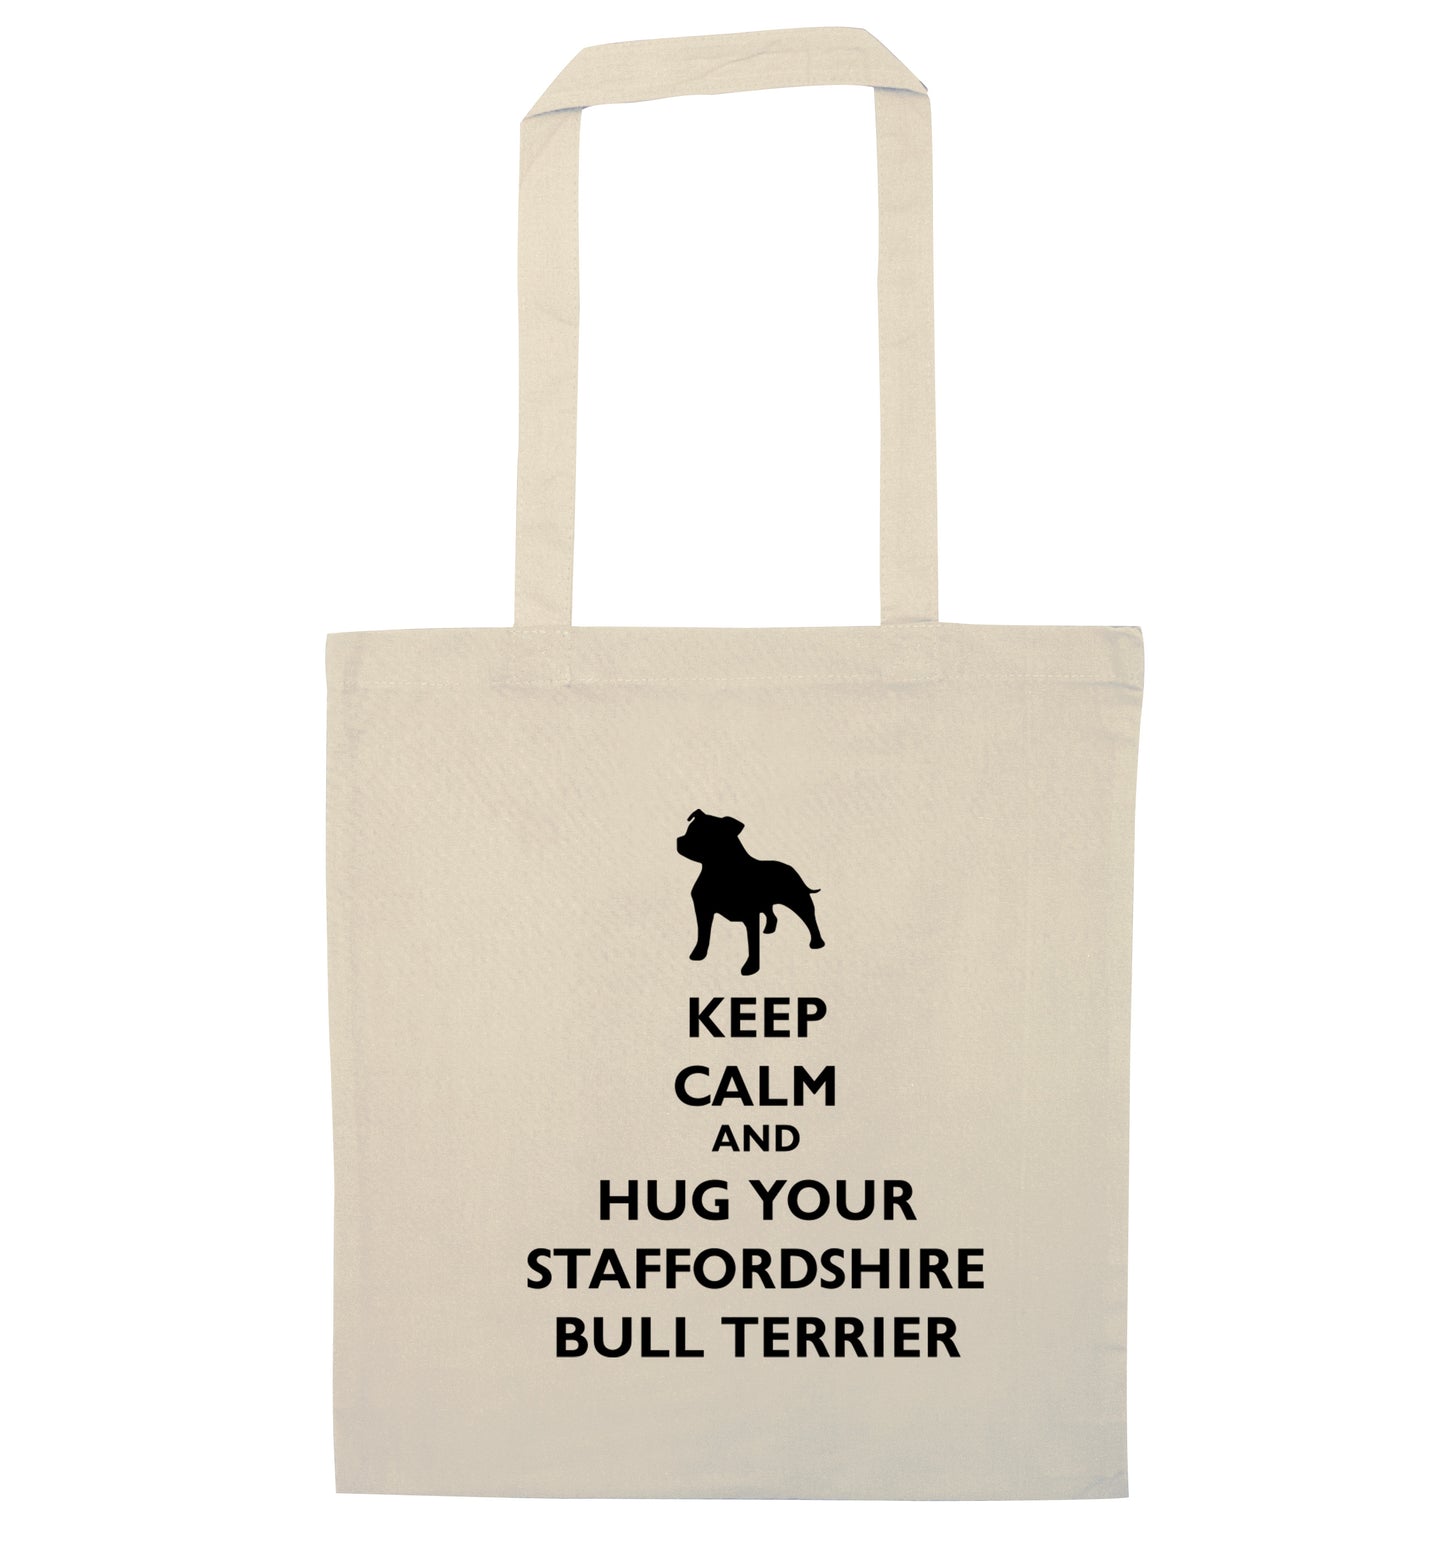 Keep calm and hug your bull terrier  natural tote bag